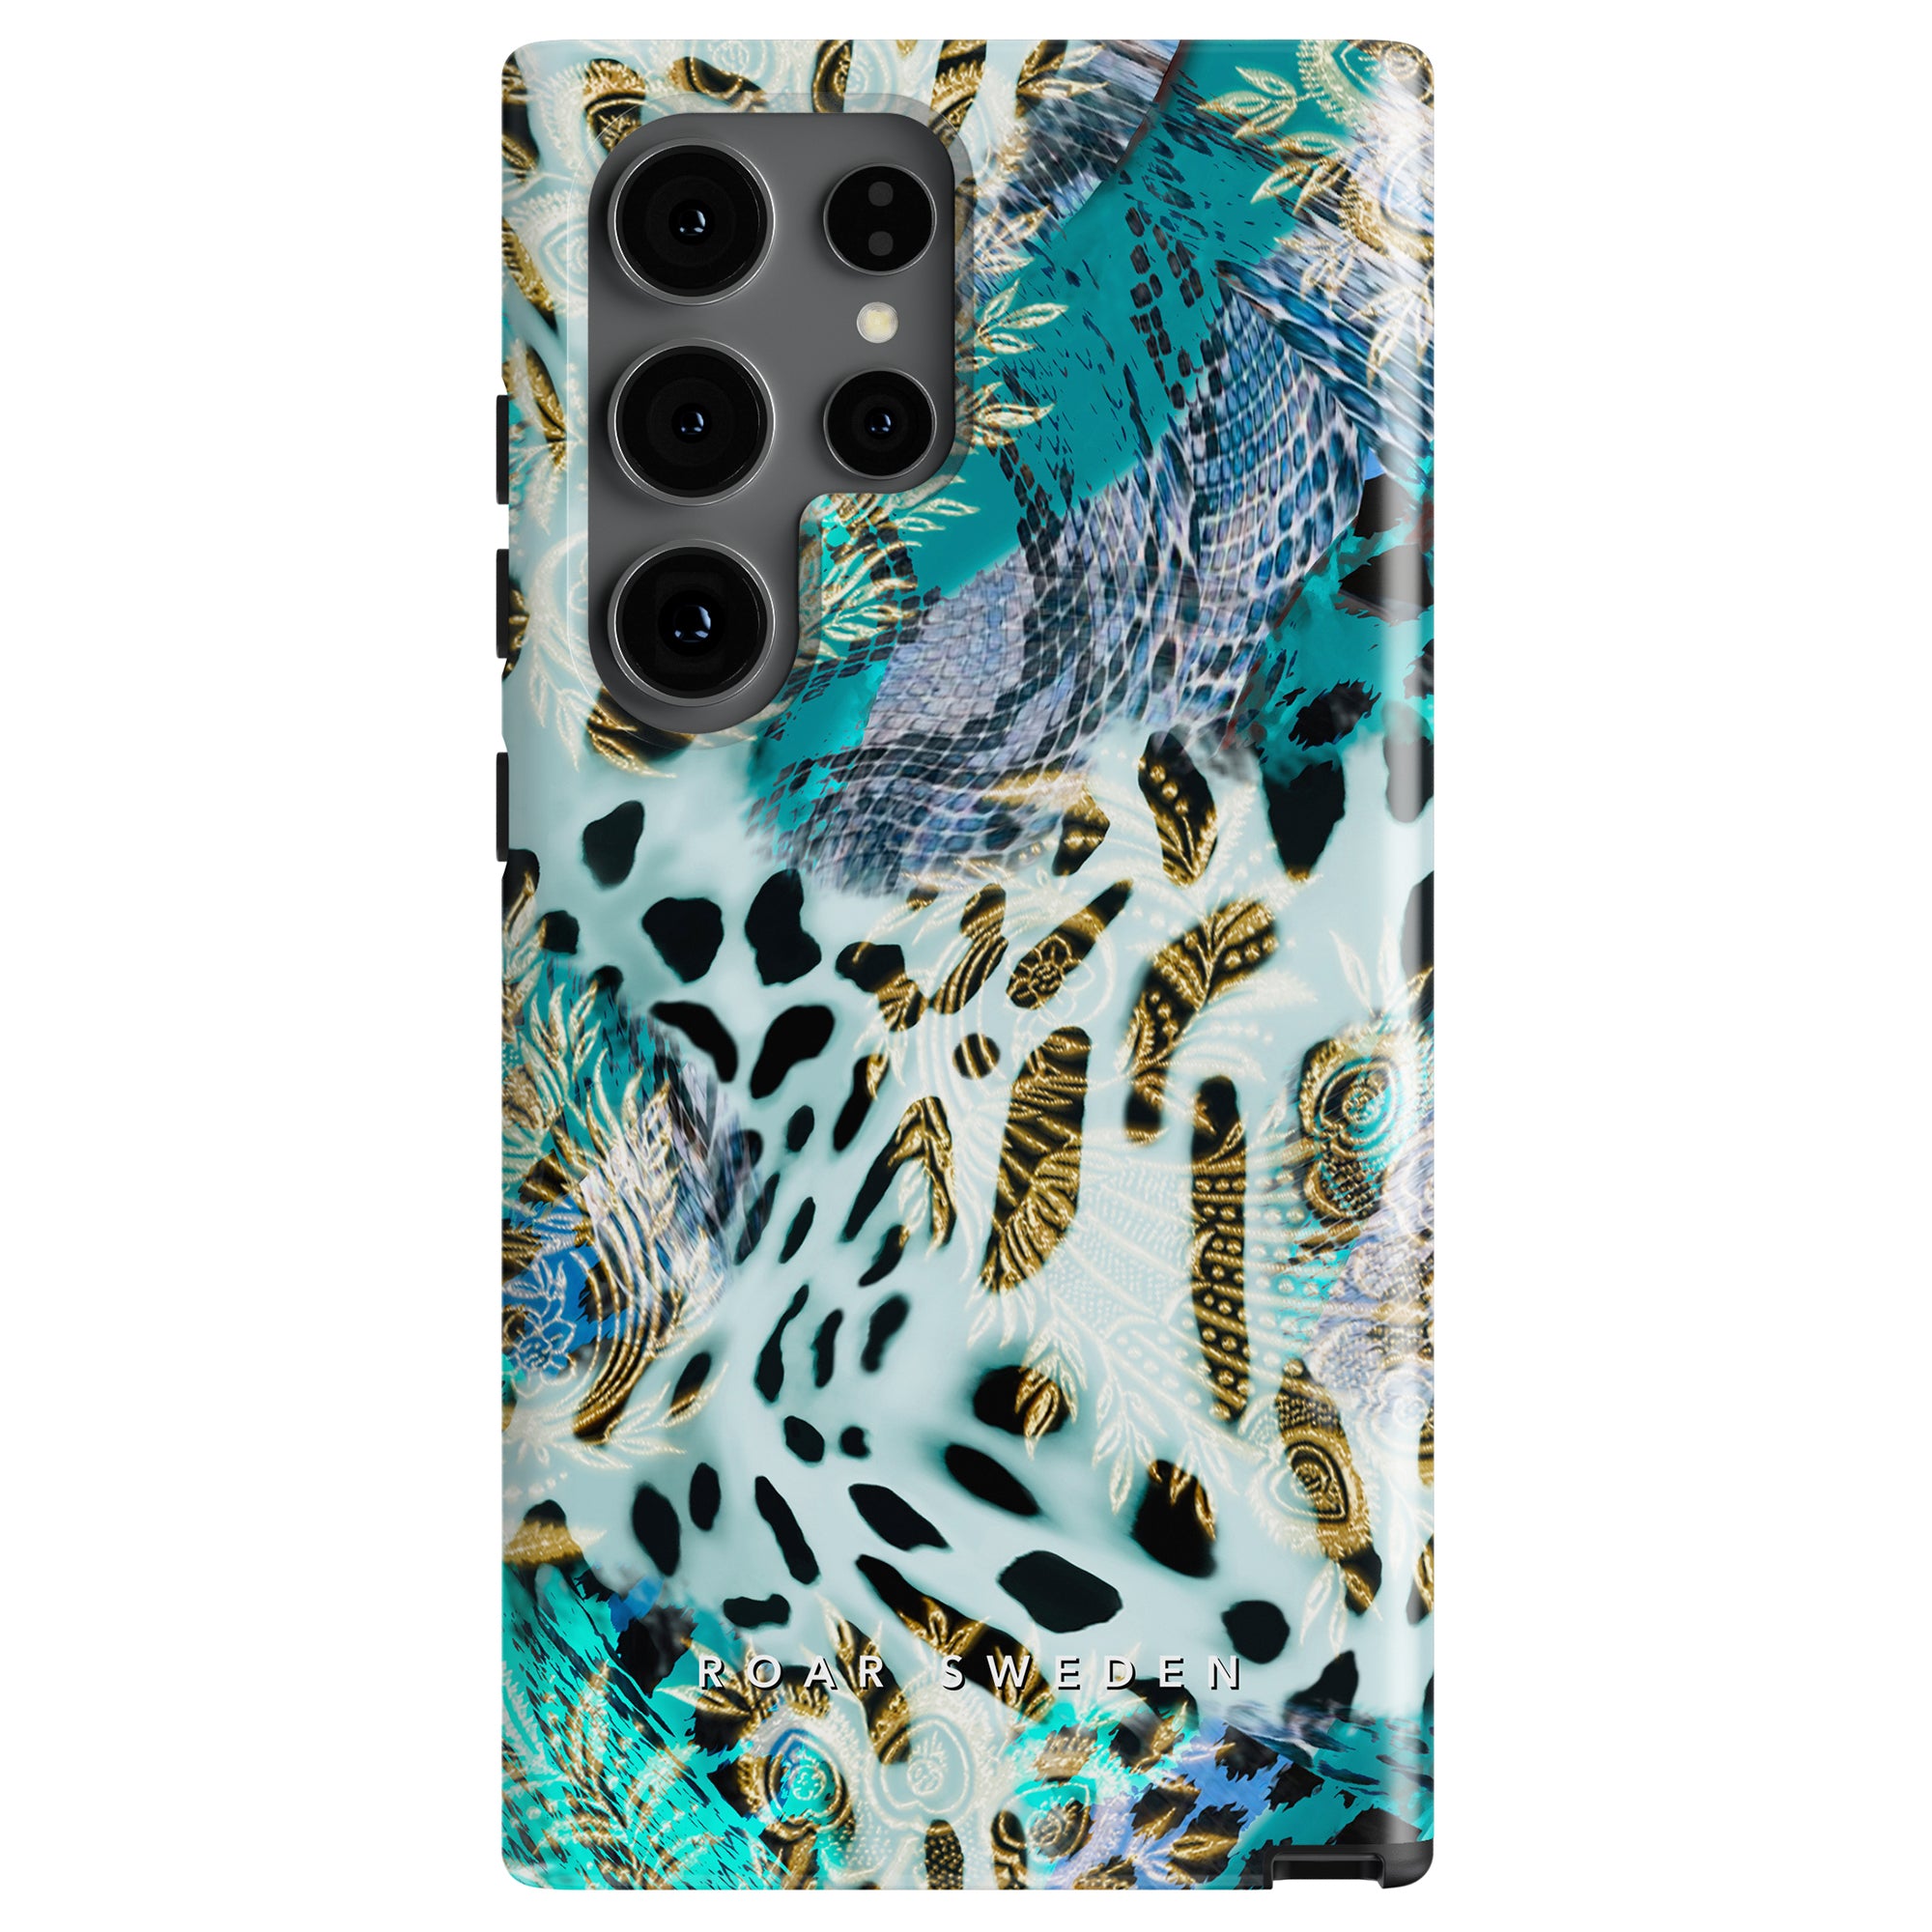 A **Cheetah Spark - Tough case** featuring an intricate, multicolored design with feathers and cheetah-mönster patterns, crafted from högkvalitativa material.